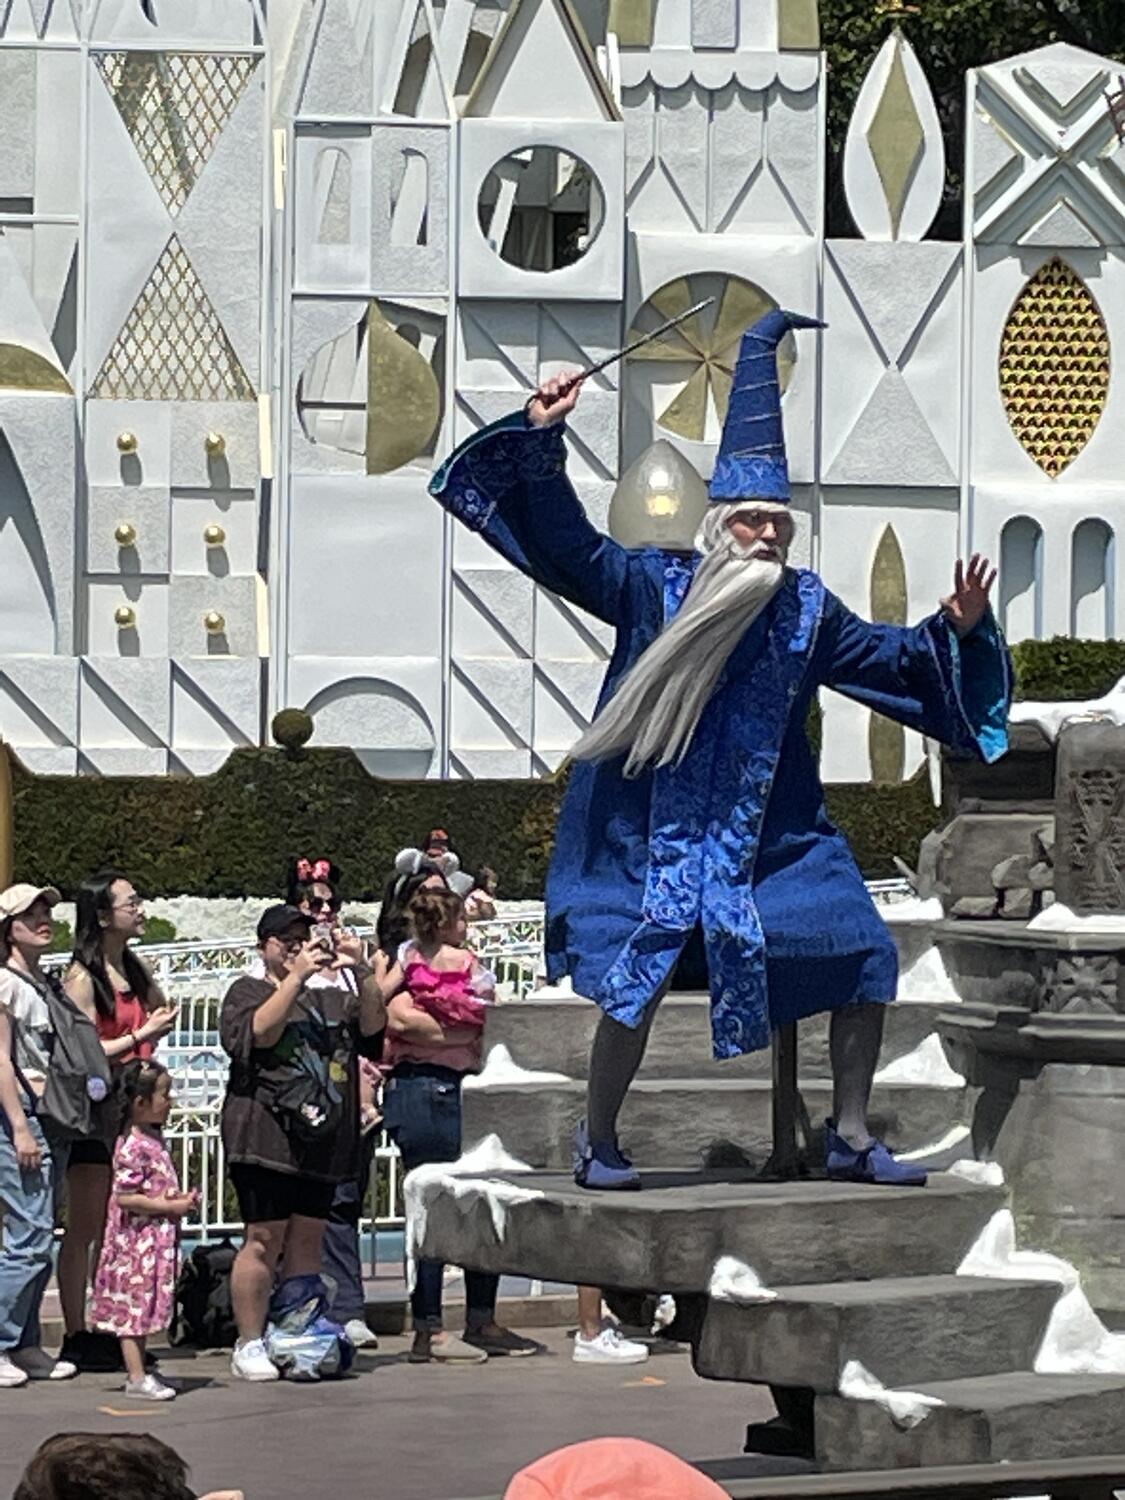 Merlin the wizard on a parade float